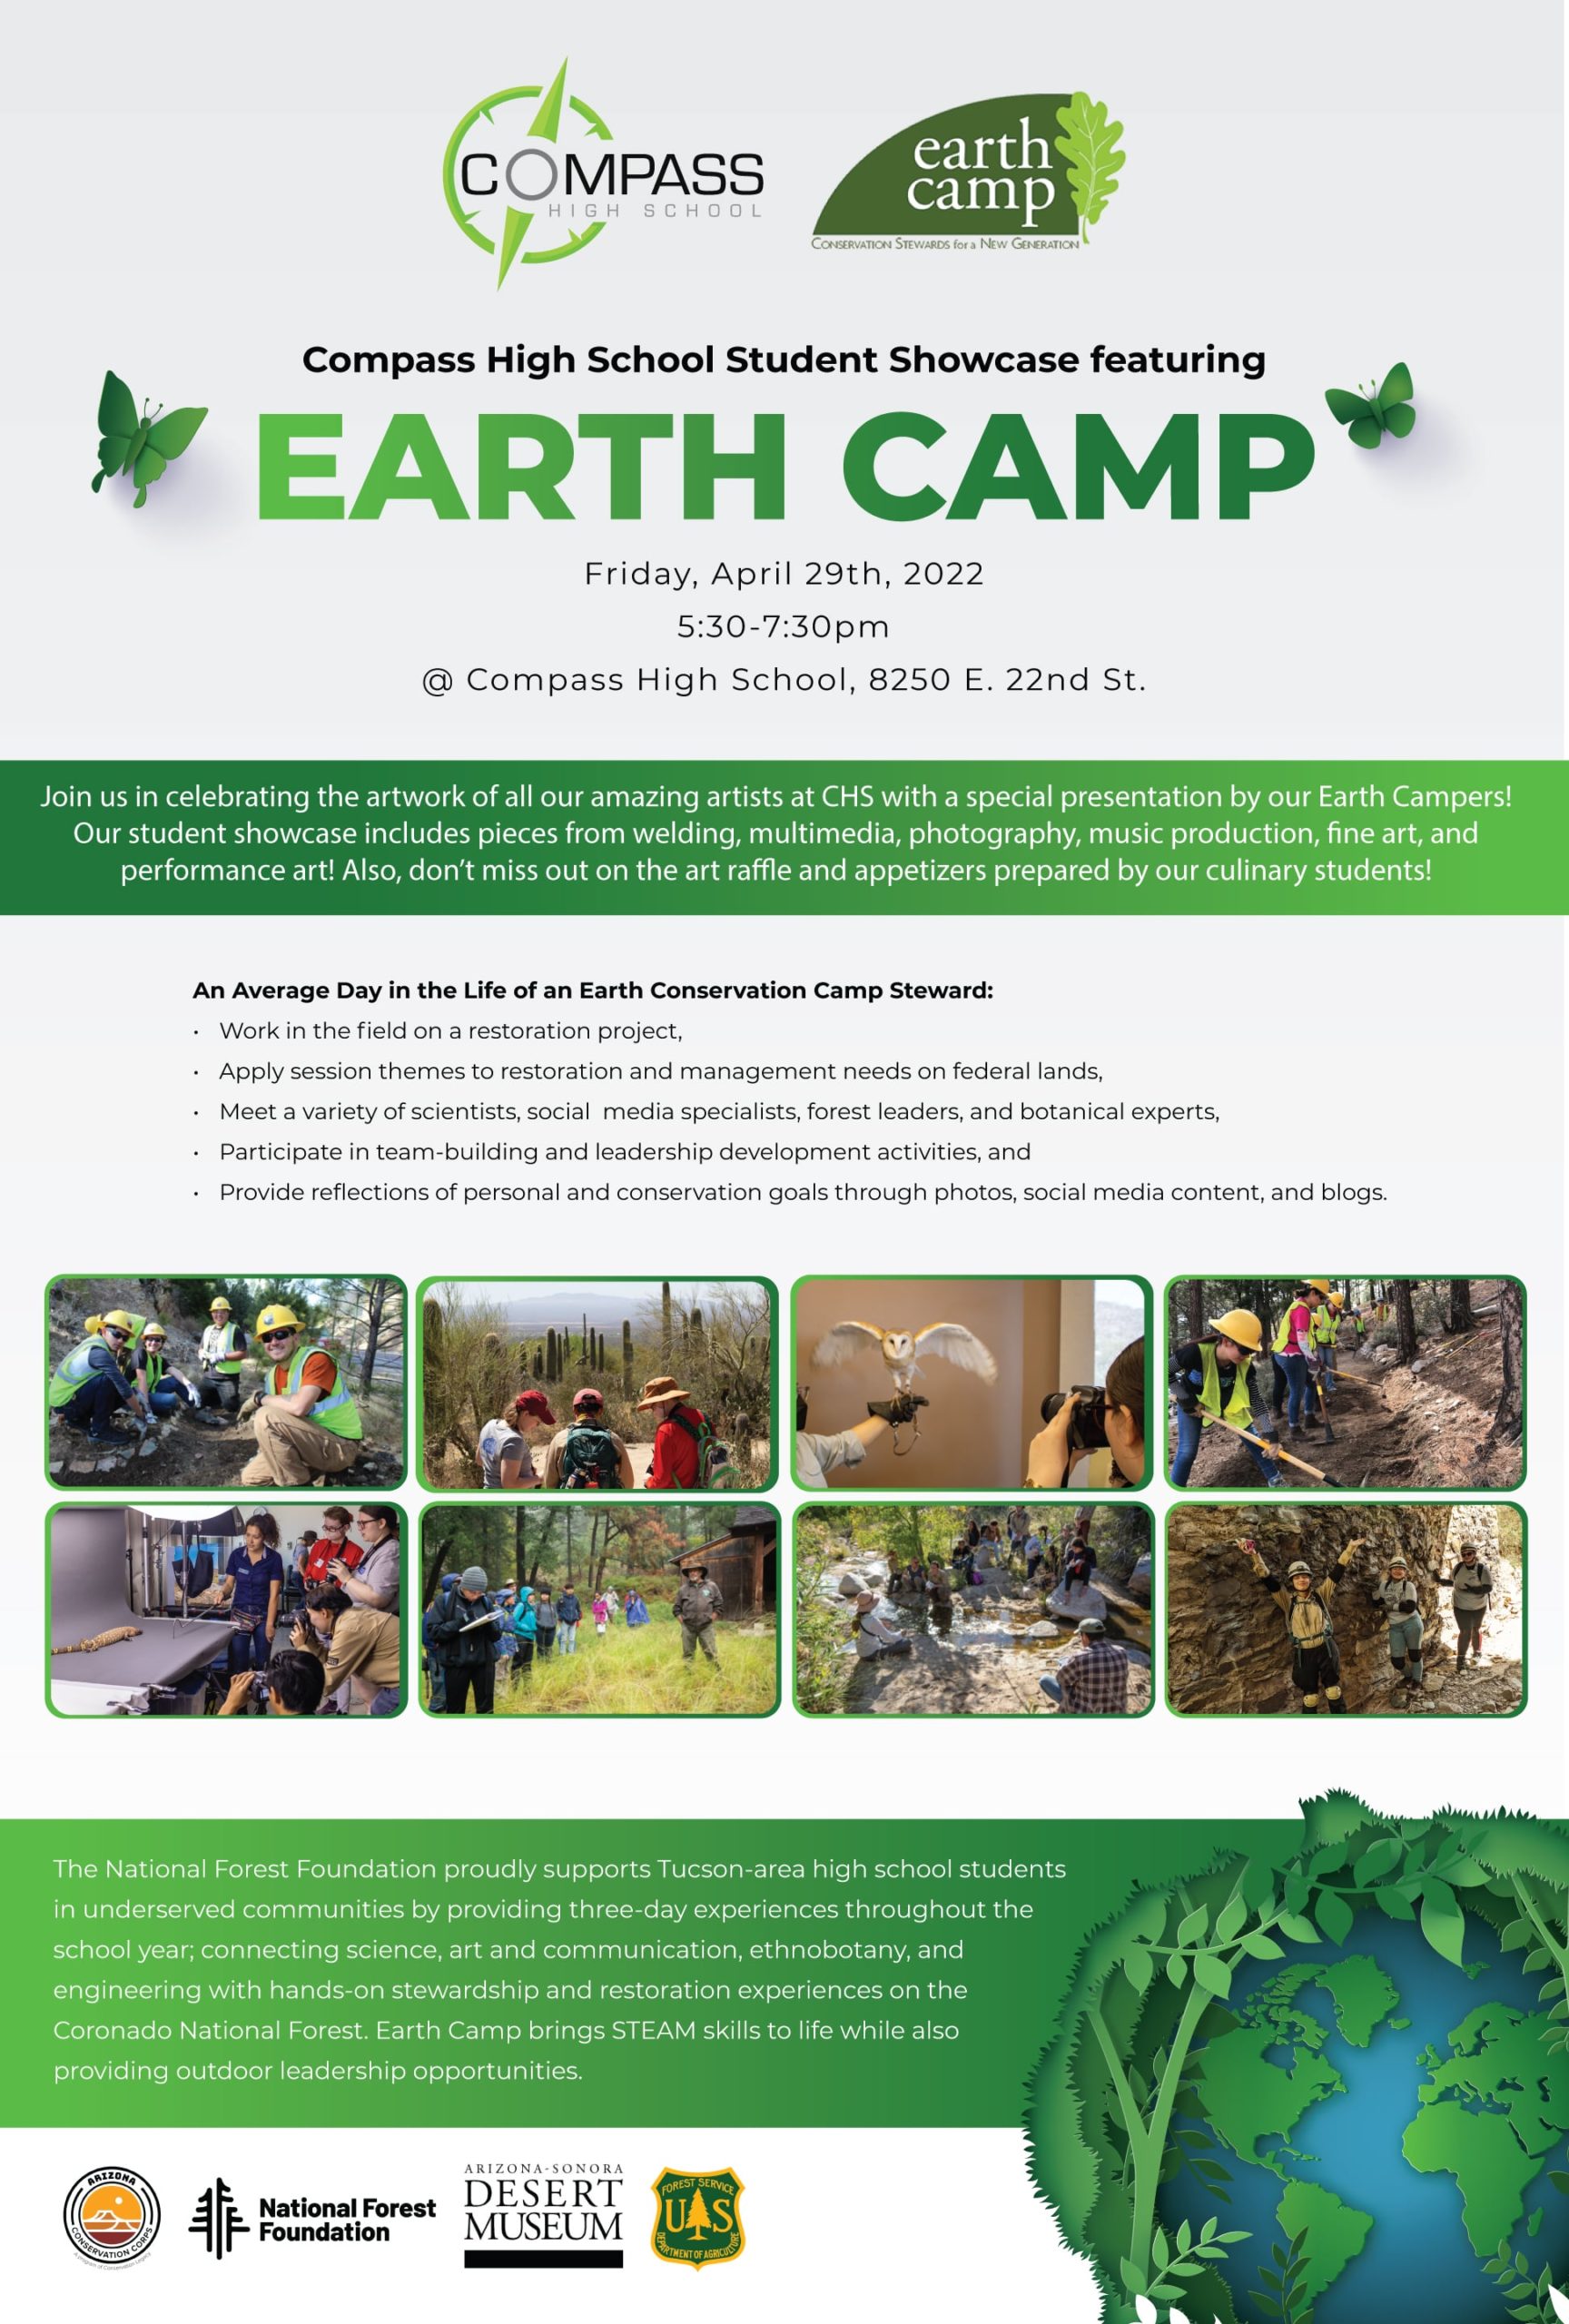 Compass High School Student Showcase featuring Earth Camp